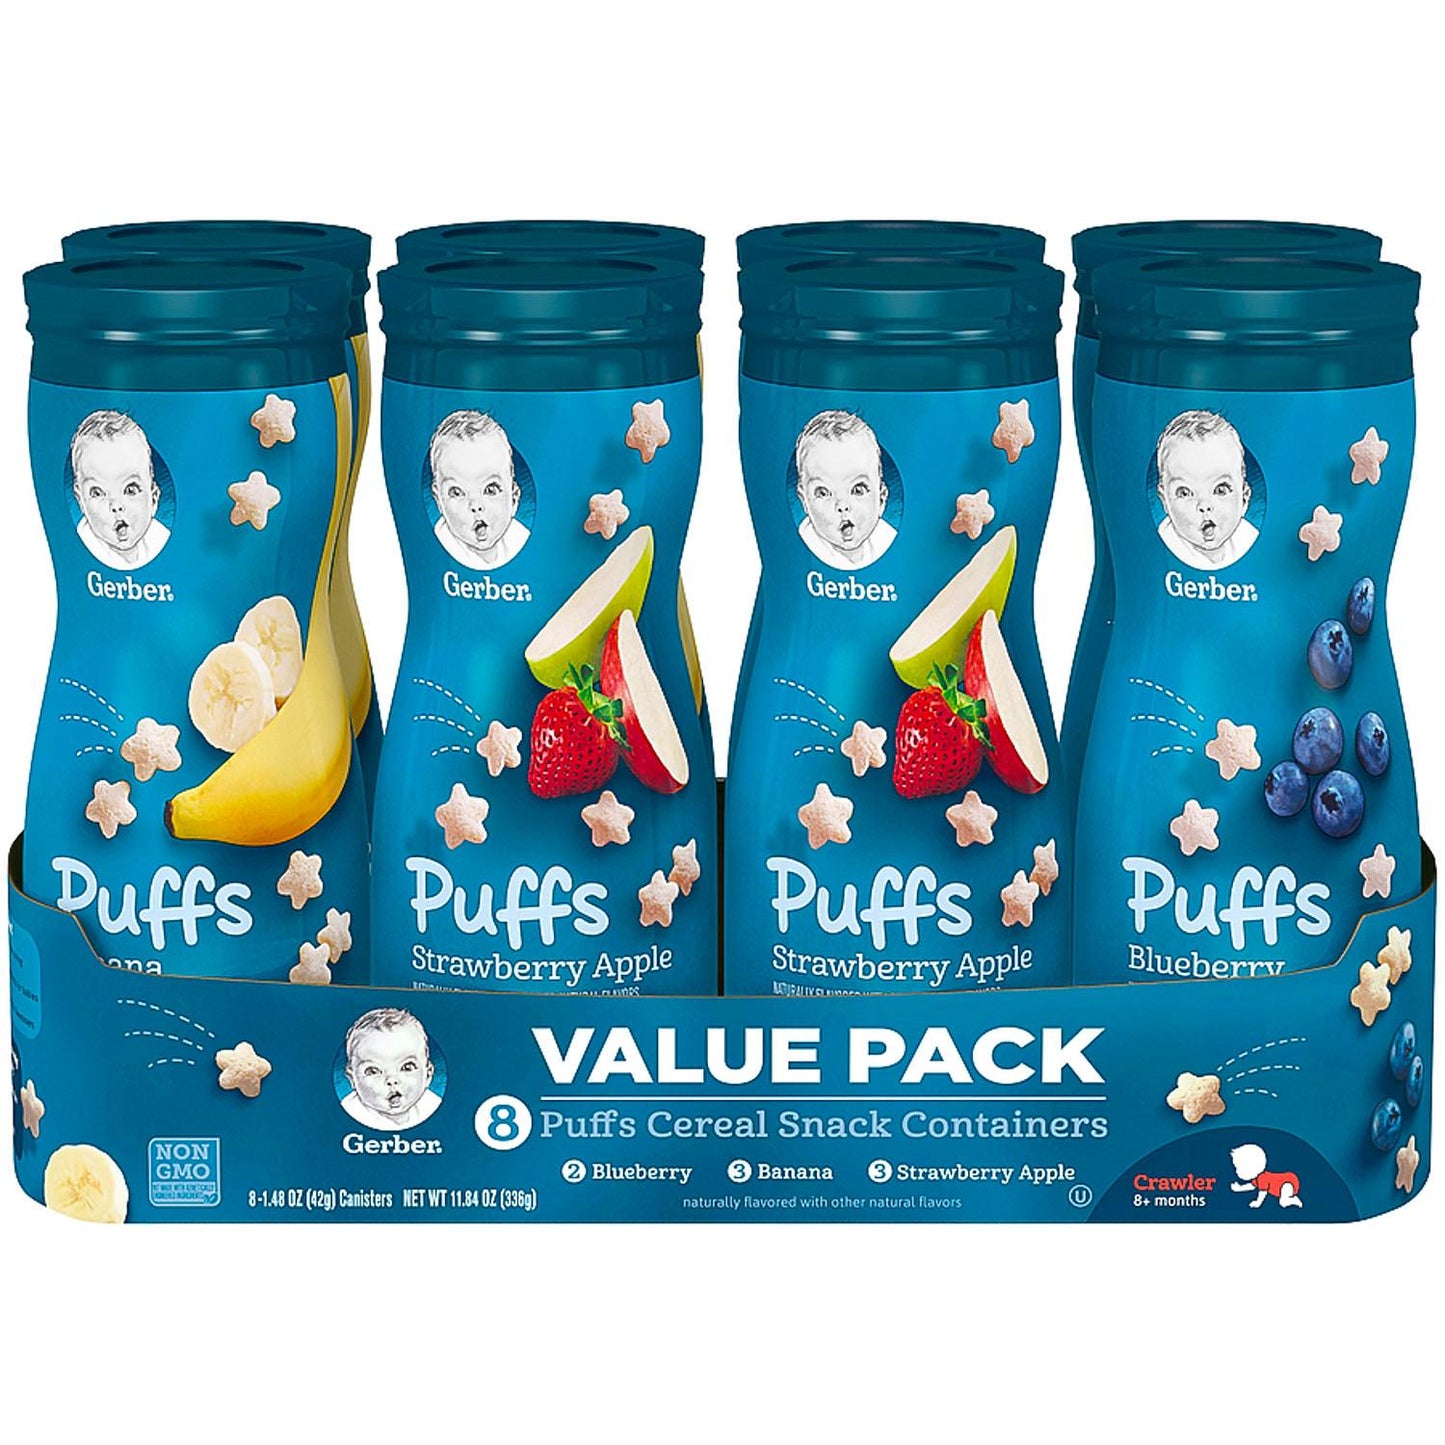 Gerber Graduates PUFFS Cereal Snack Variety Pack - 1.48oz/8pk